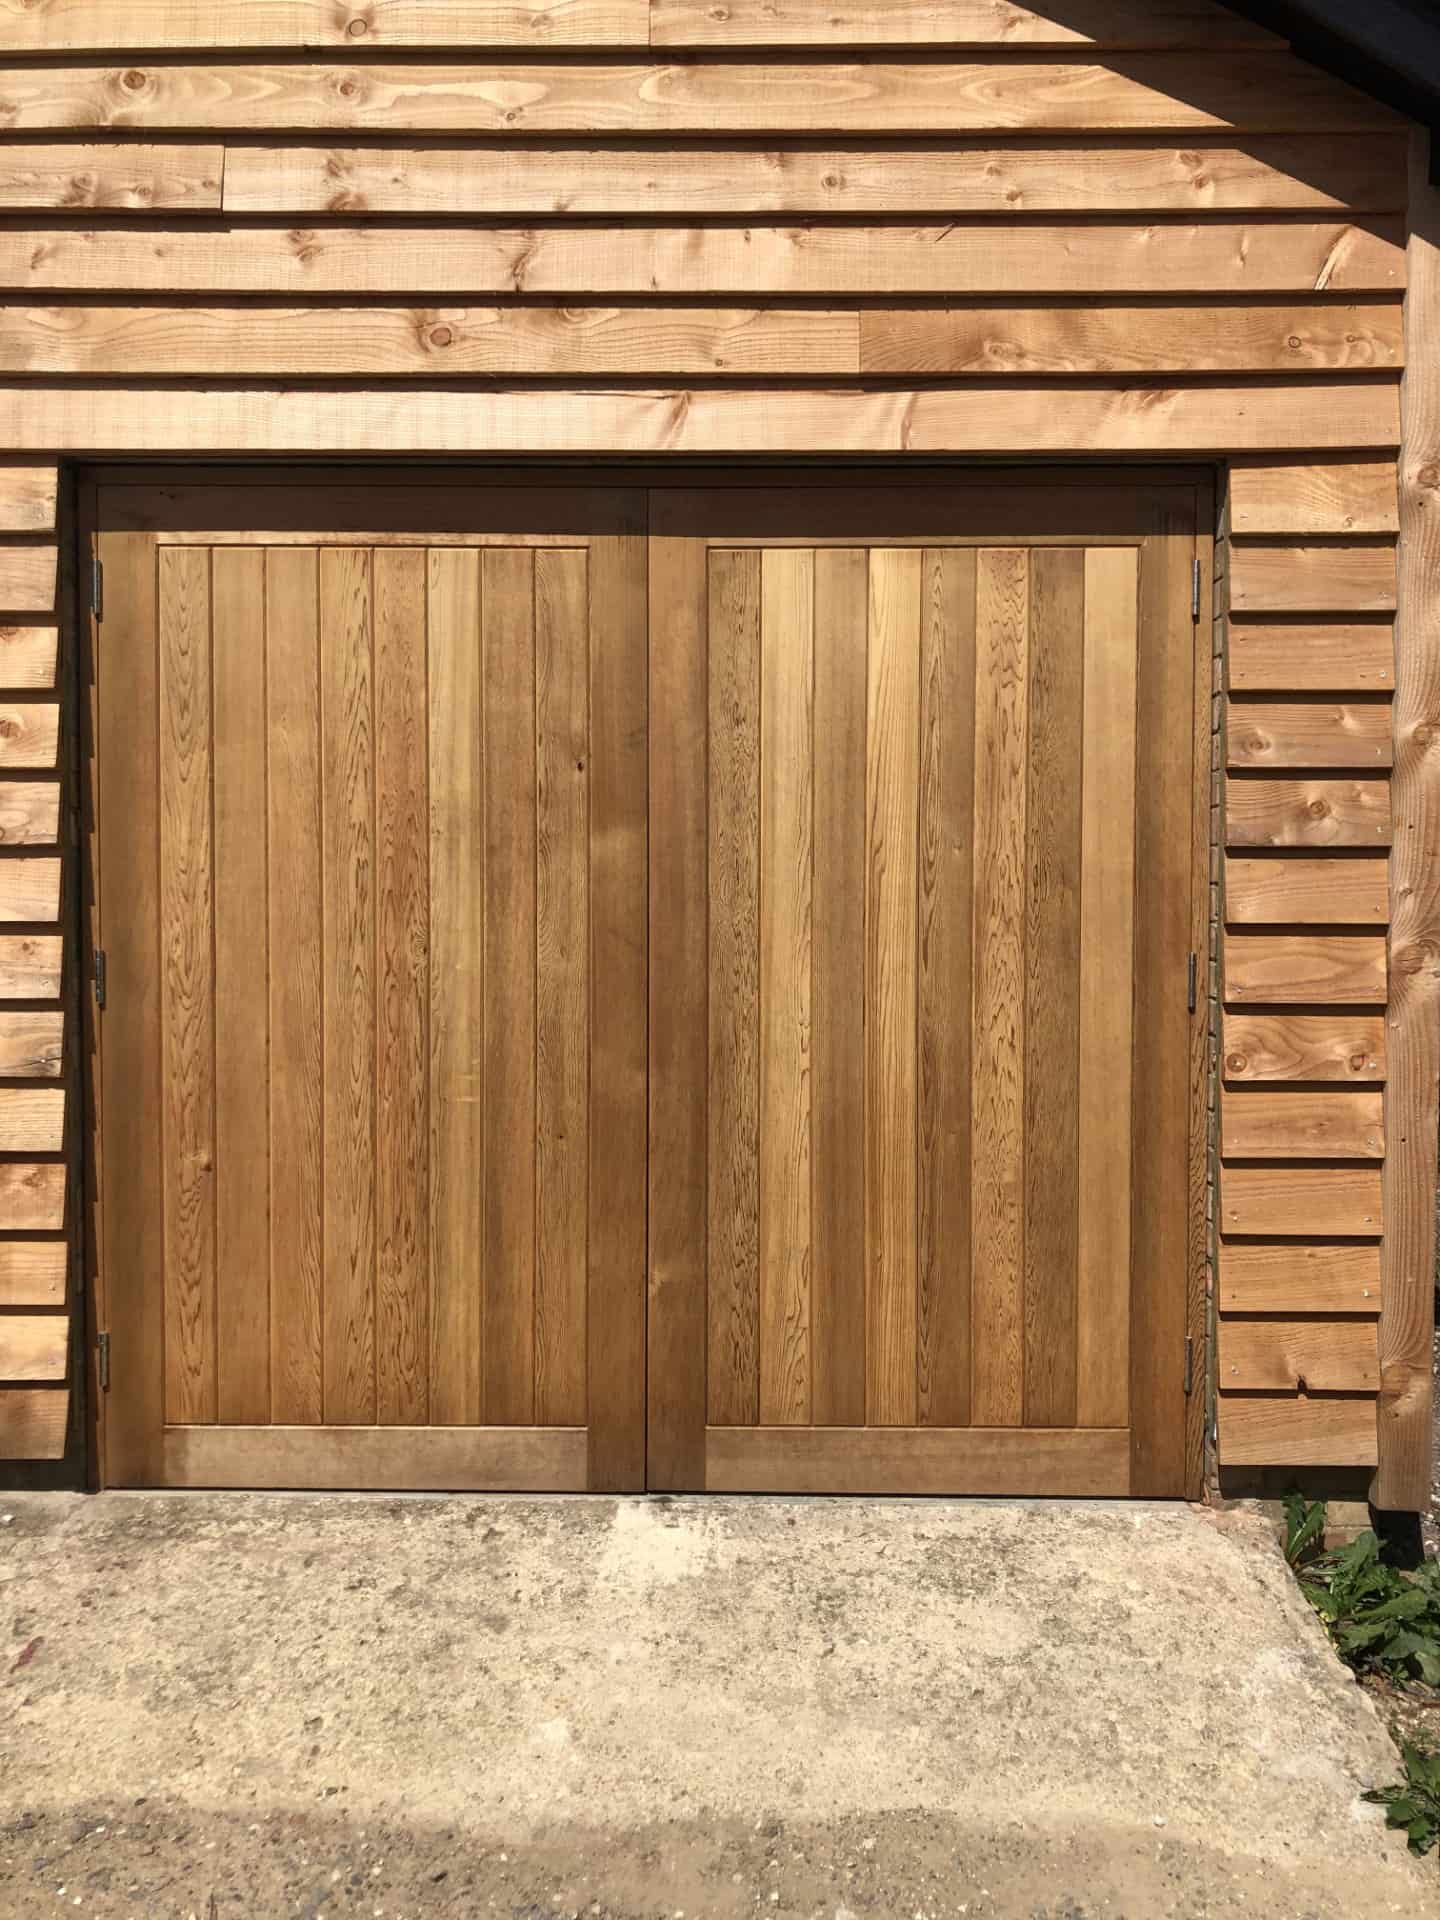 Bespoke workshop doors which have been fitted.